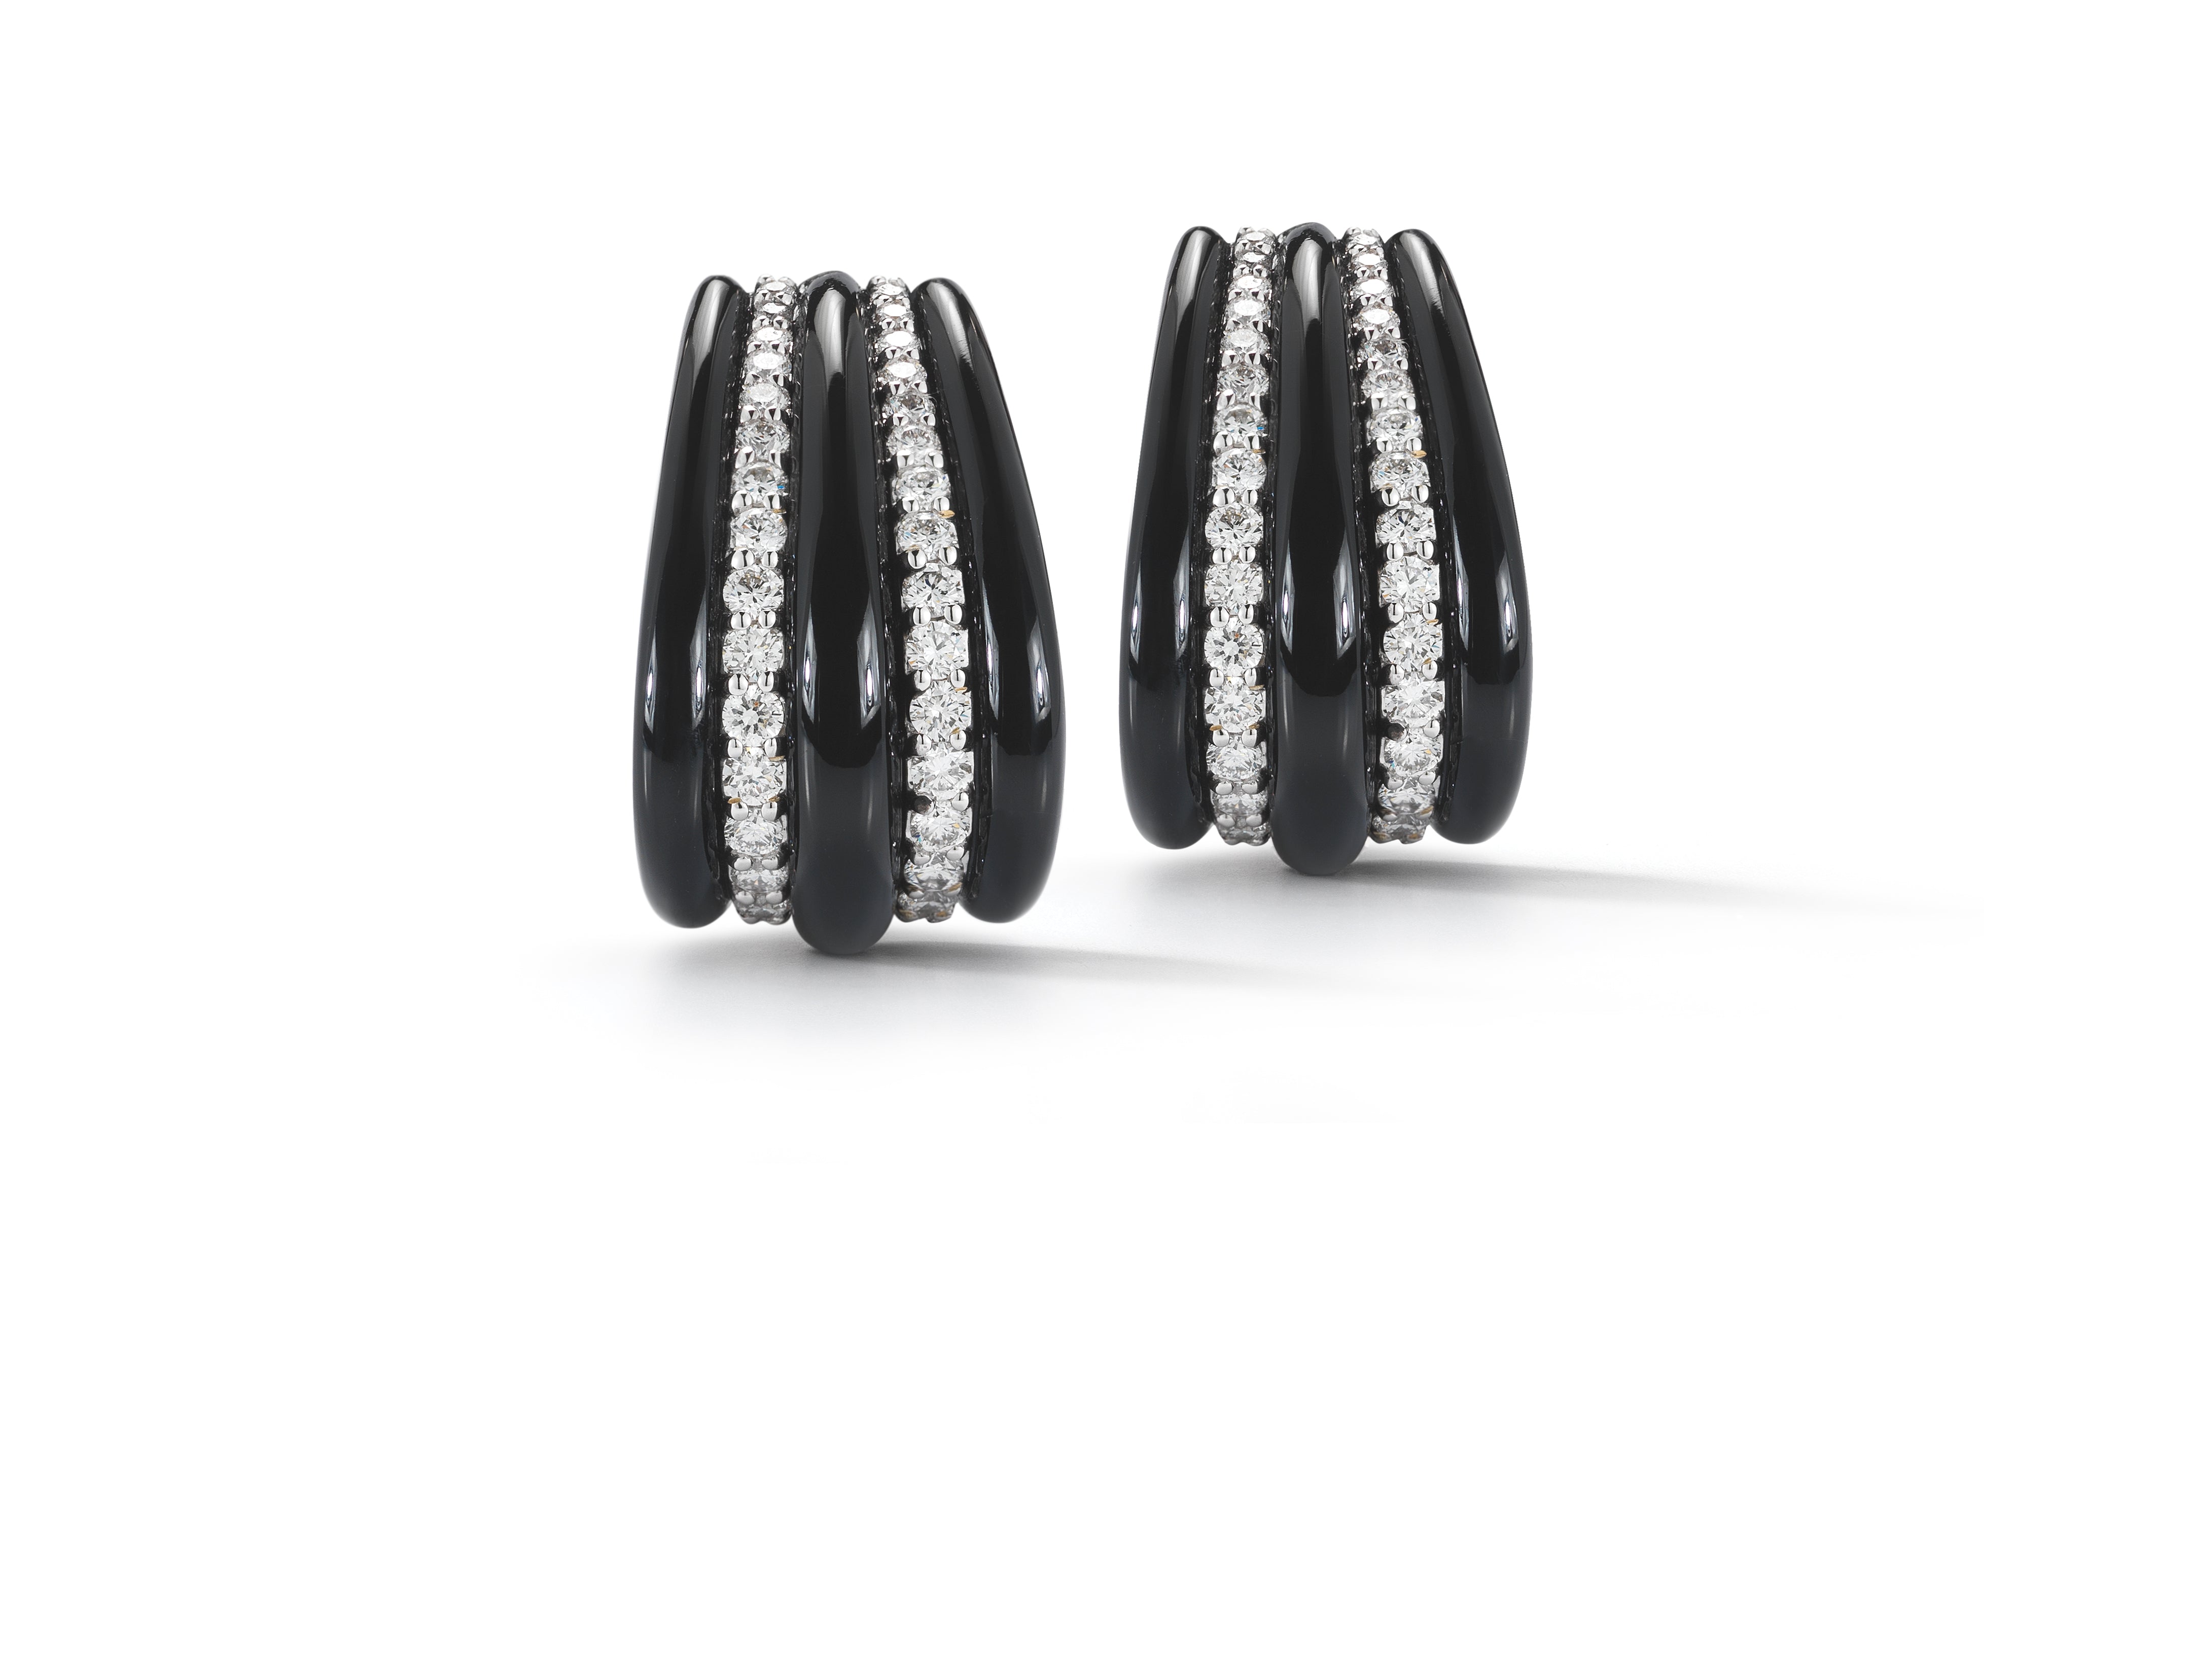 A pair of Hoop Earrings in Black Onyx with Diamond Accents Set in 18K White Gold. Signed Seaman Schepps.